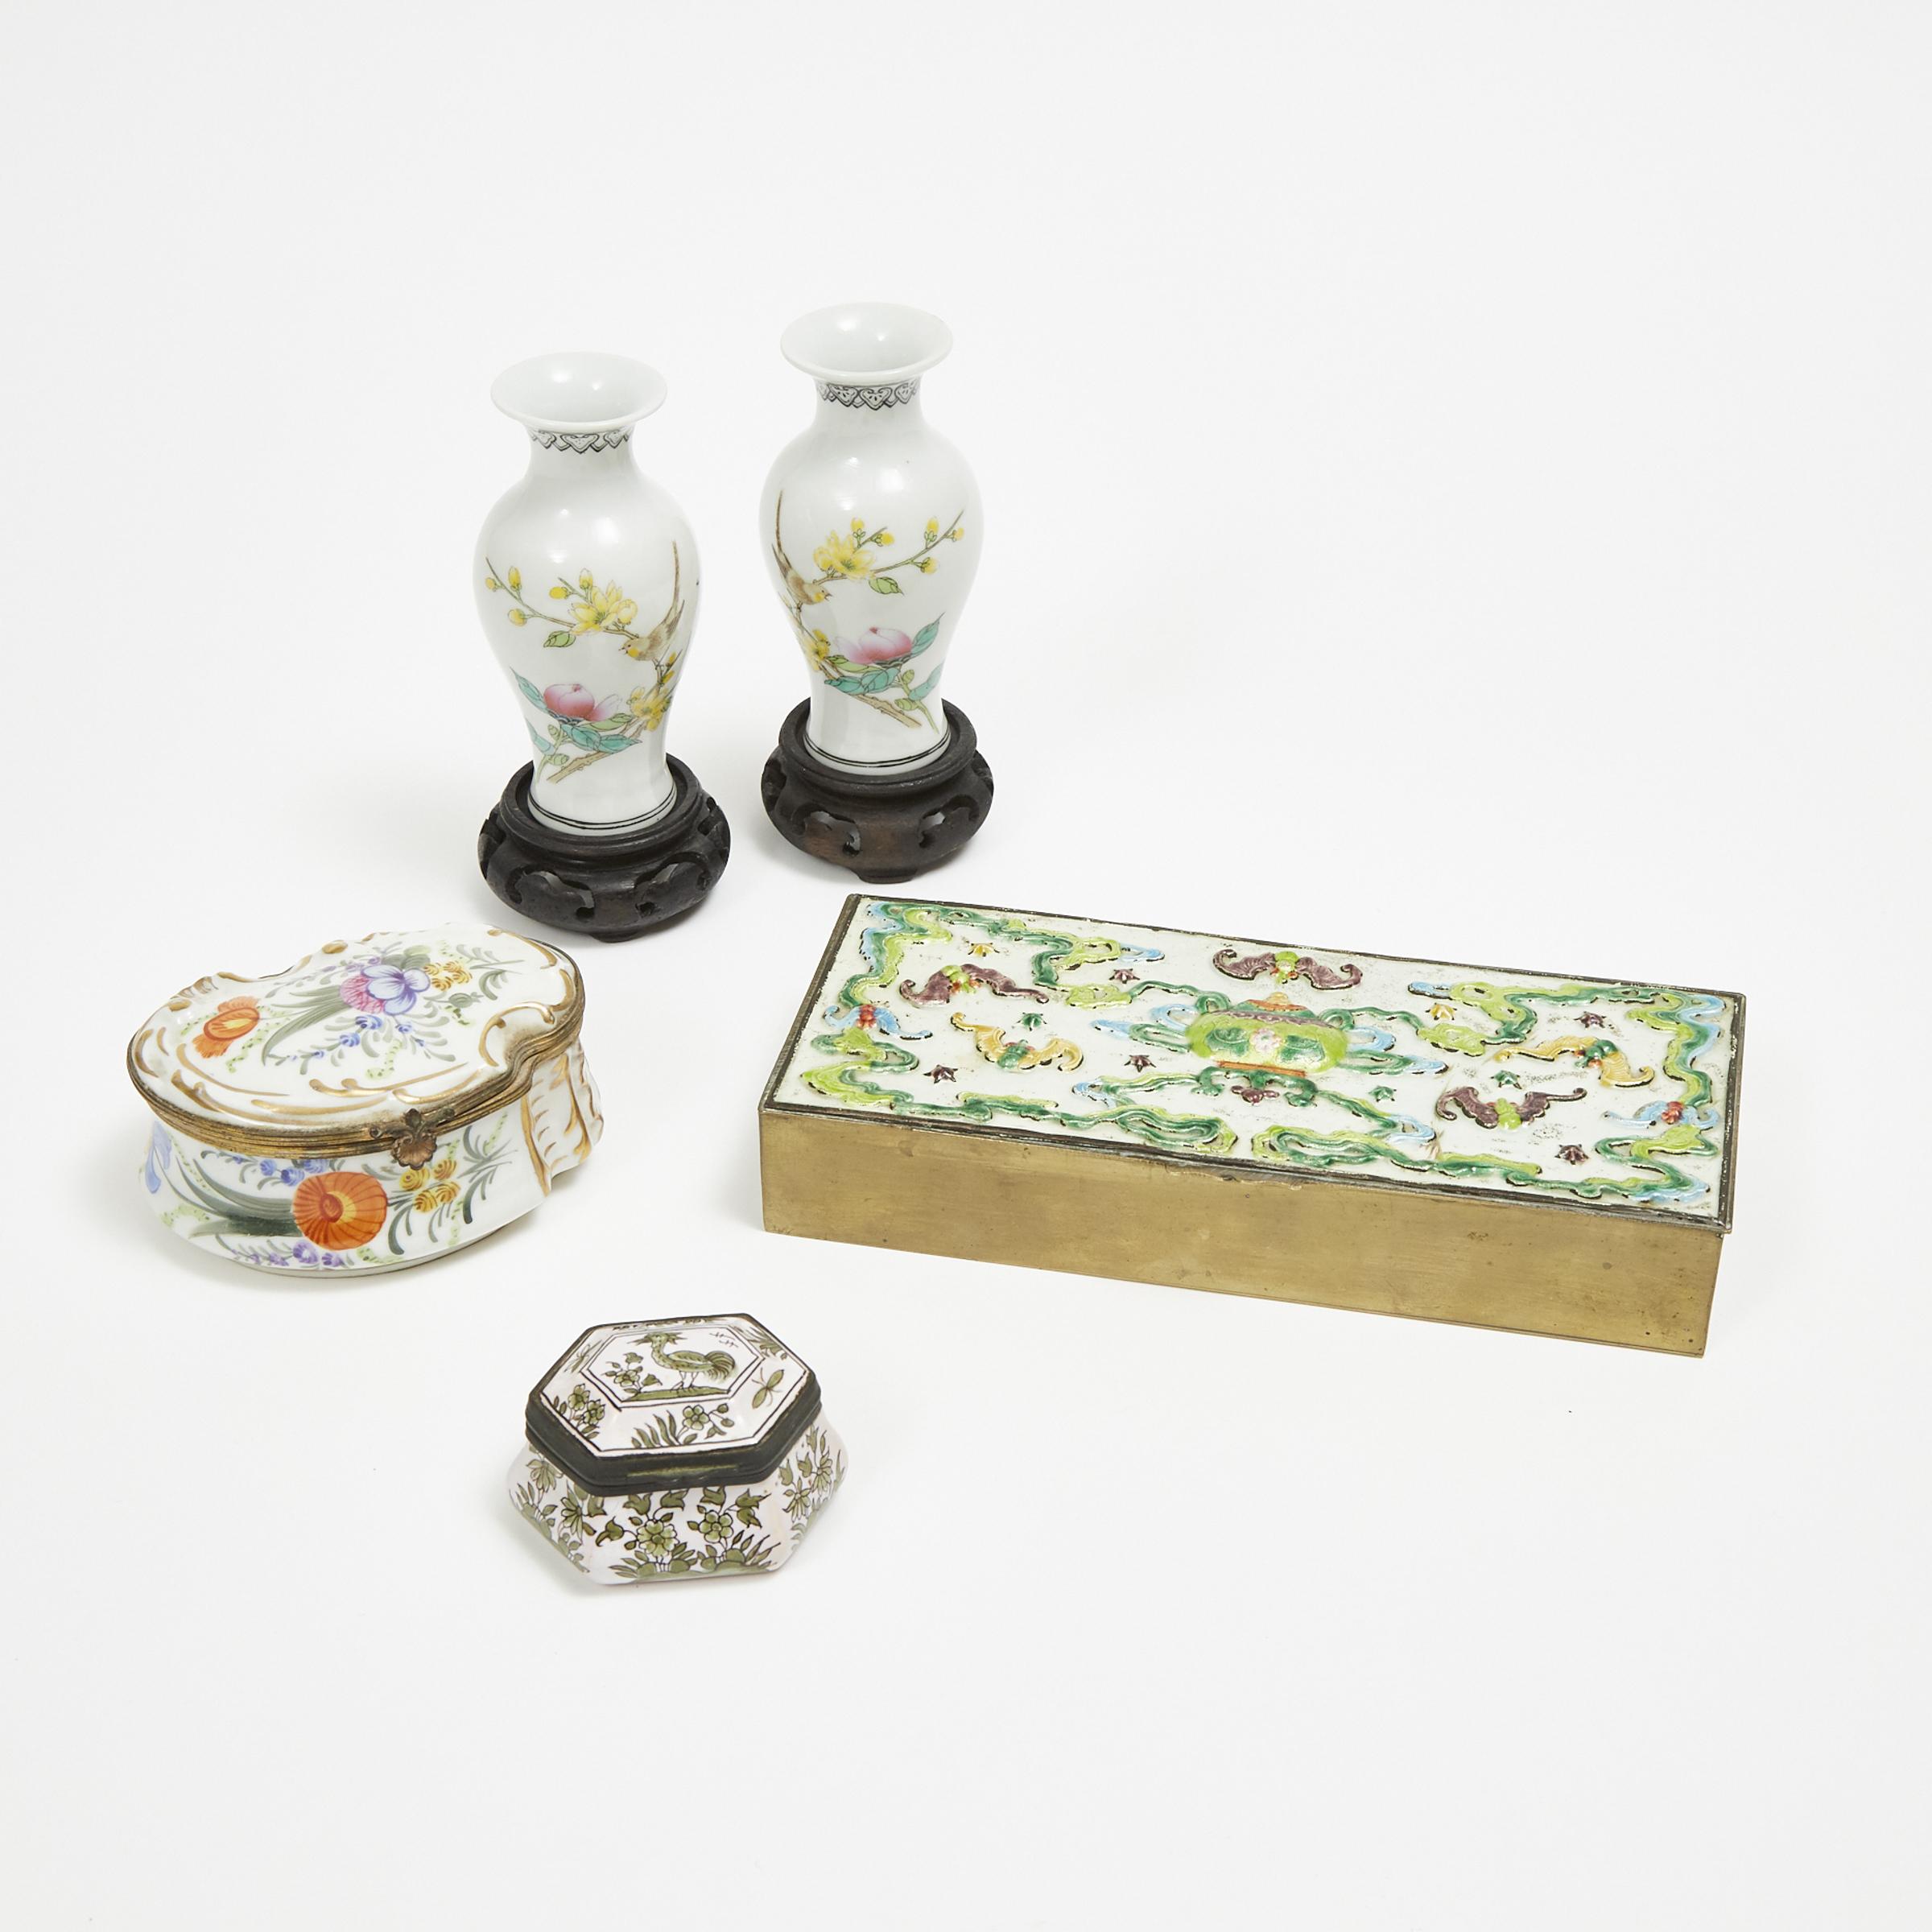 A Pair of Miniature Porcelain 'Birds and Flowers' Vases with Stands, Qianlong Mark, together with a Chinese  Enamel Box and Two European Ceramic  Boxes